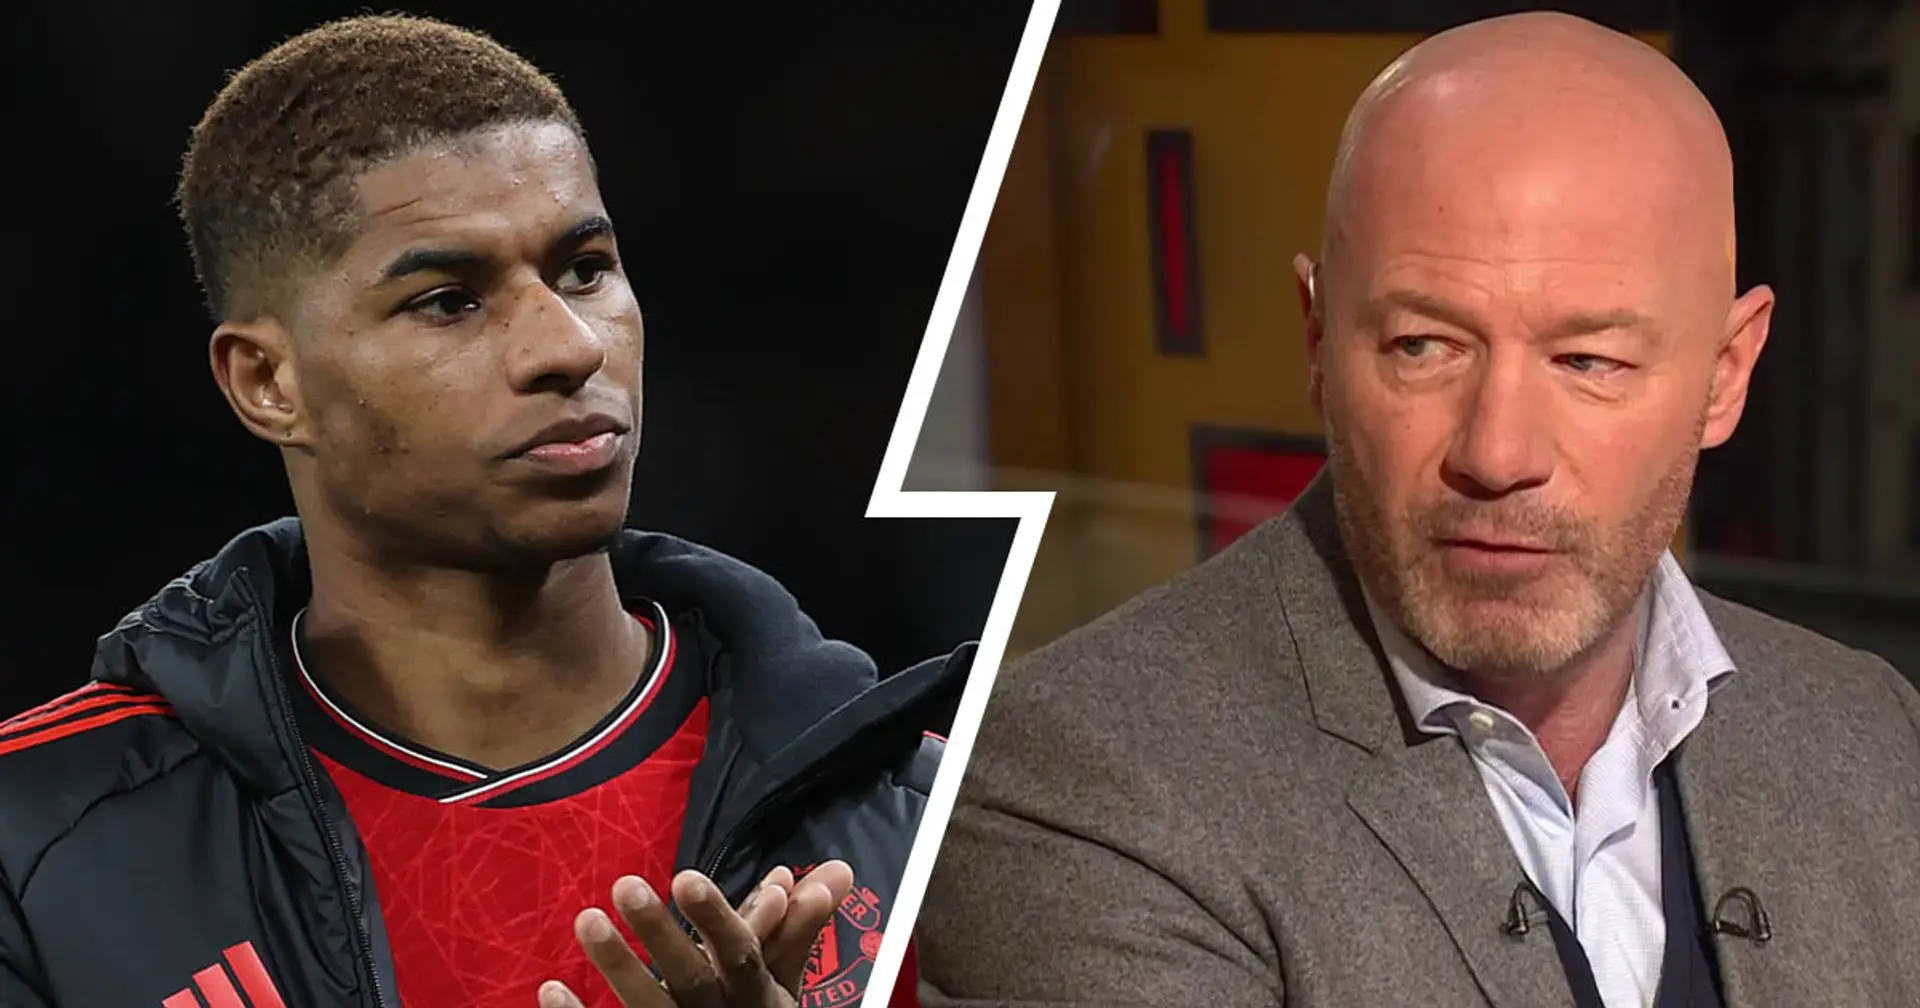 'He can't keep doing this': Alan Shearer sends harsh warning to Rashford after he misses Newport clash